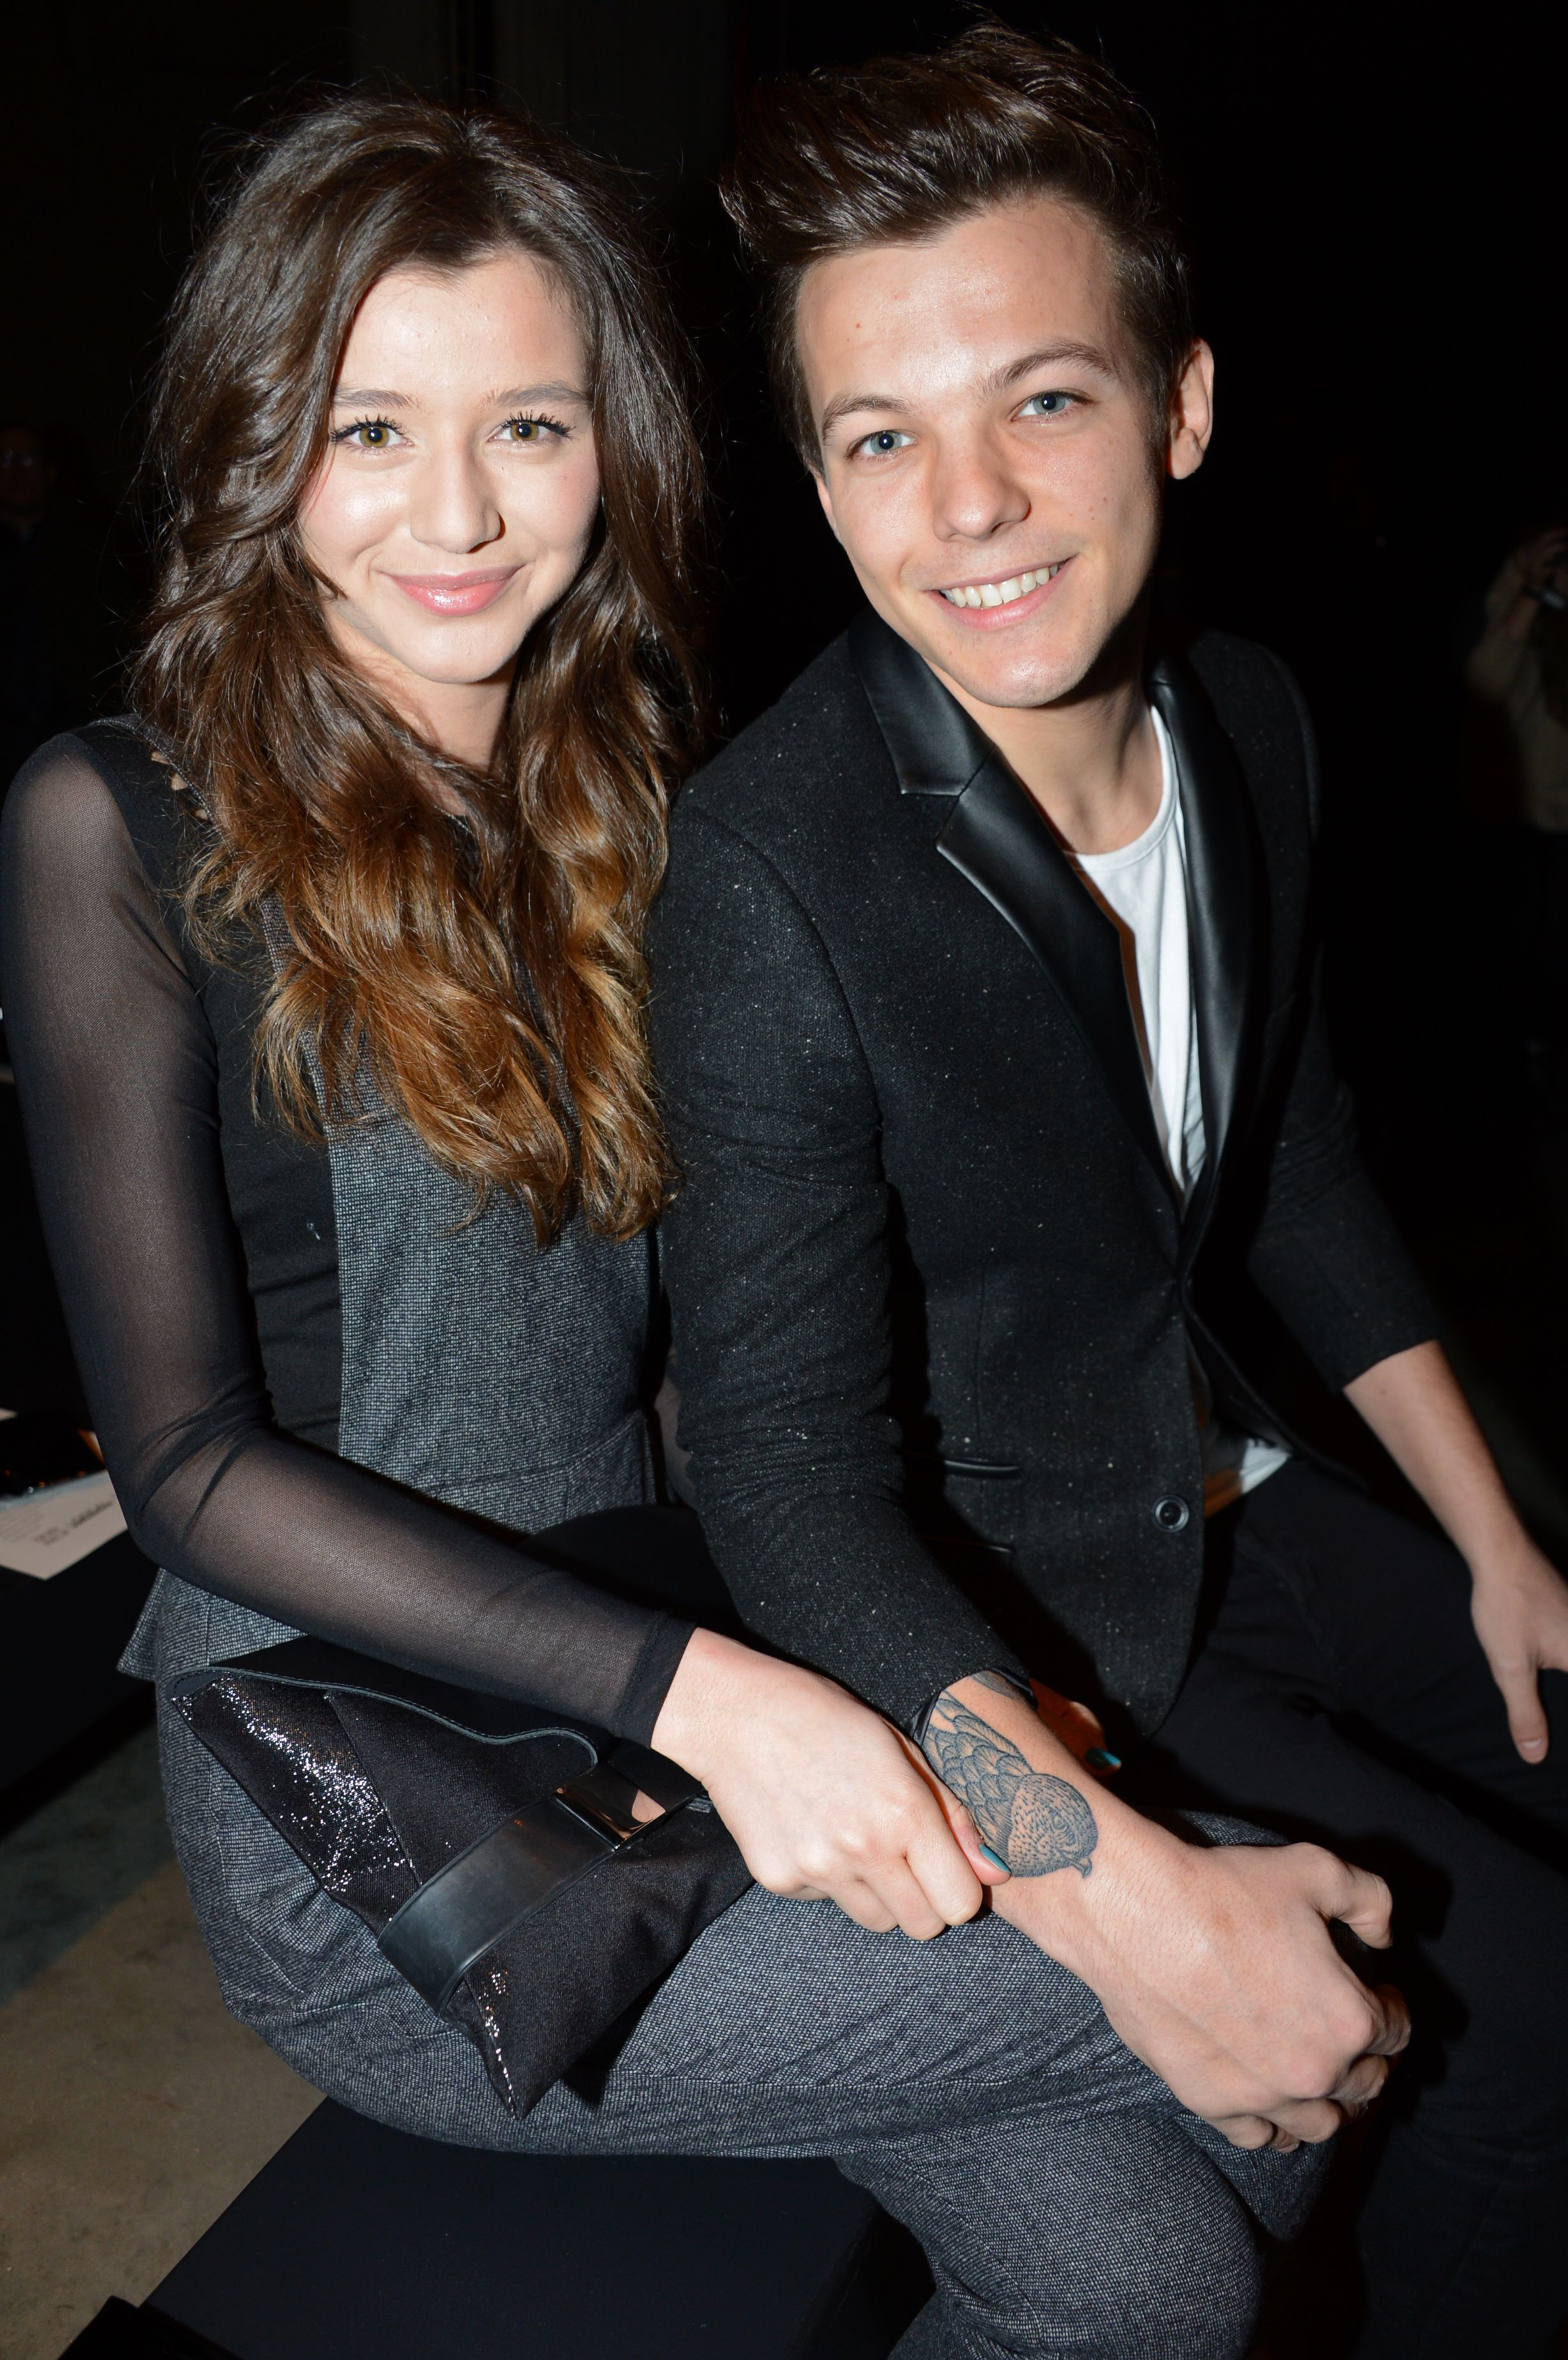 louis and eleanor 2022 engaged